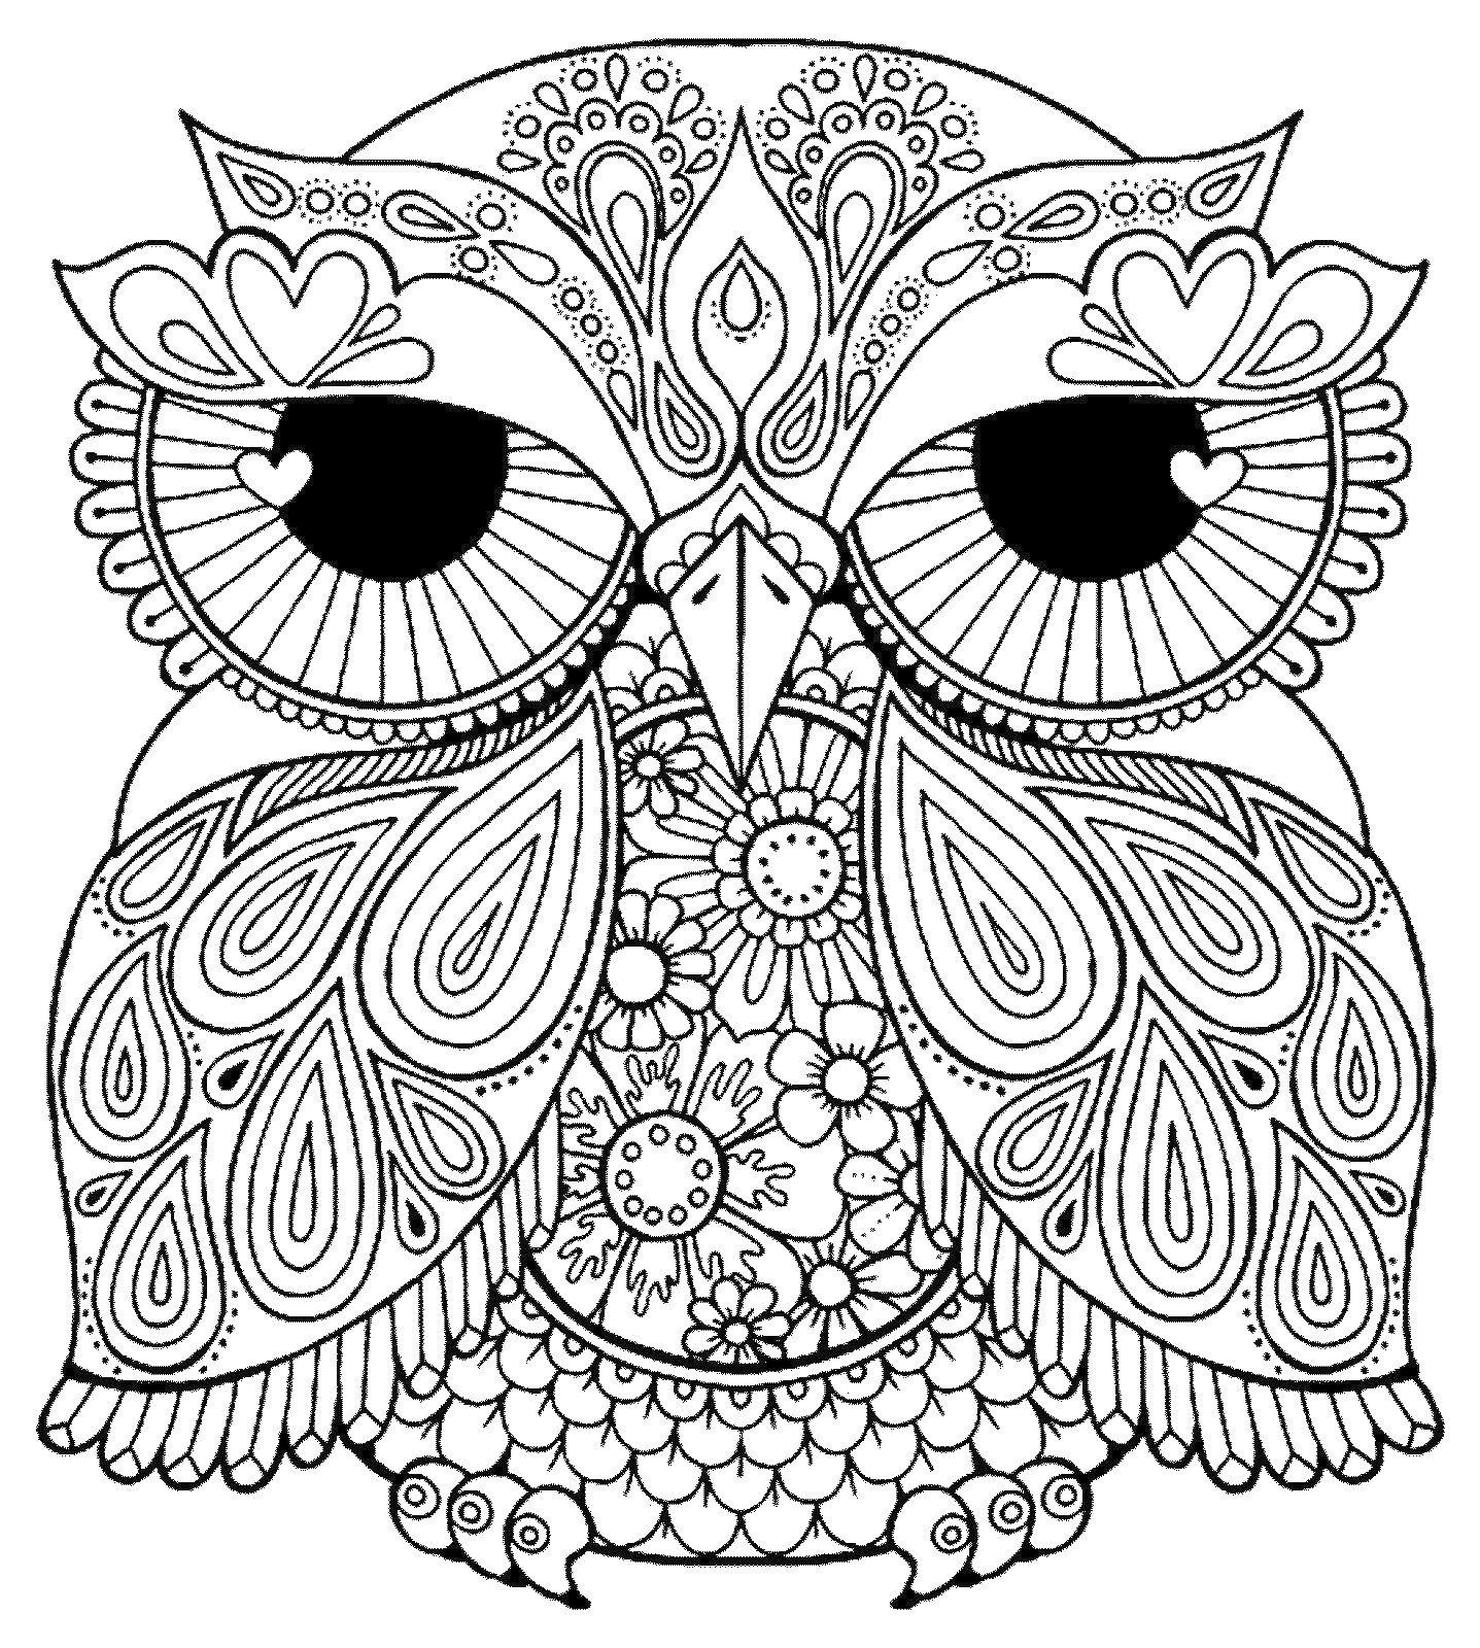 Printable Grown Up Coloring Pages